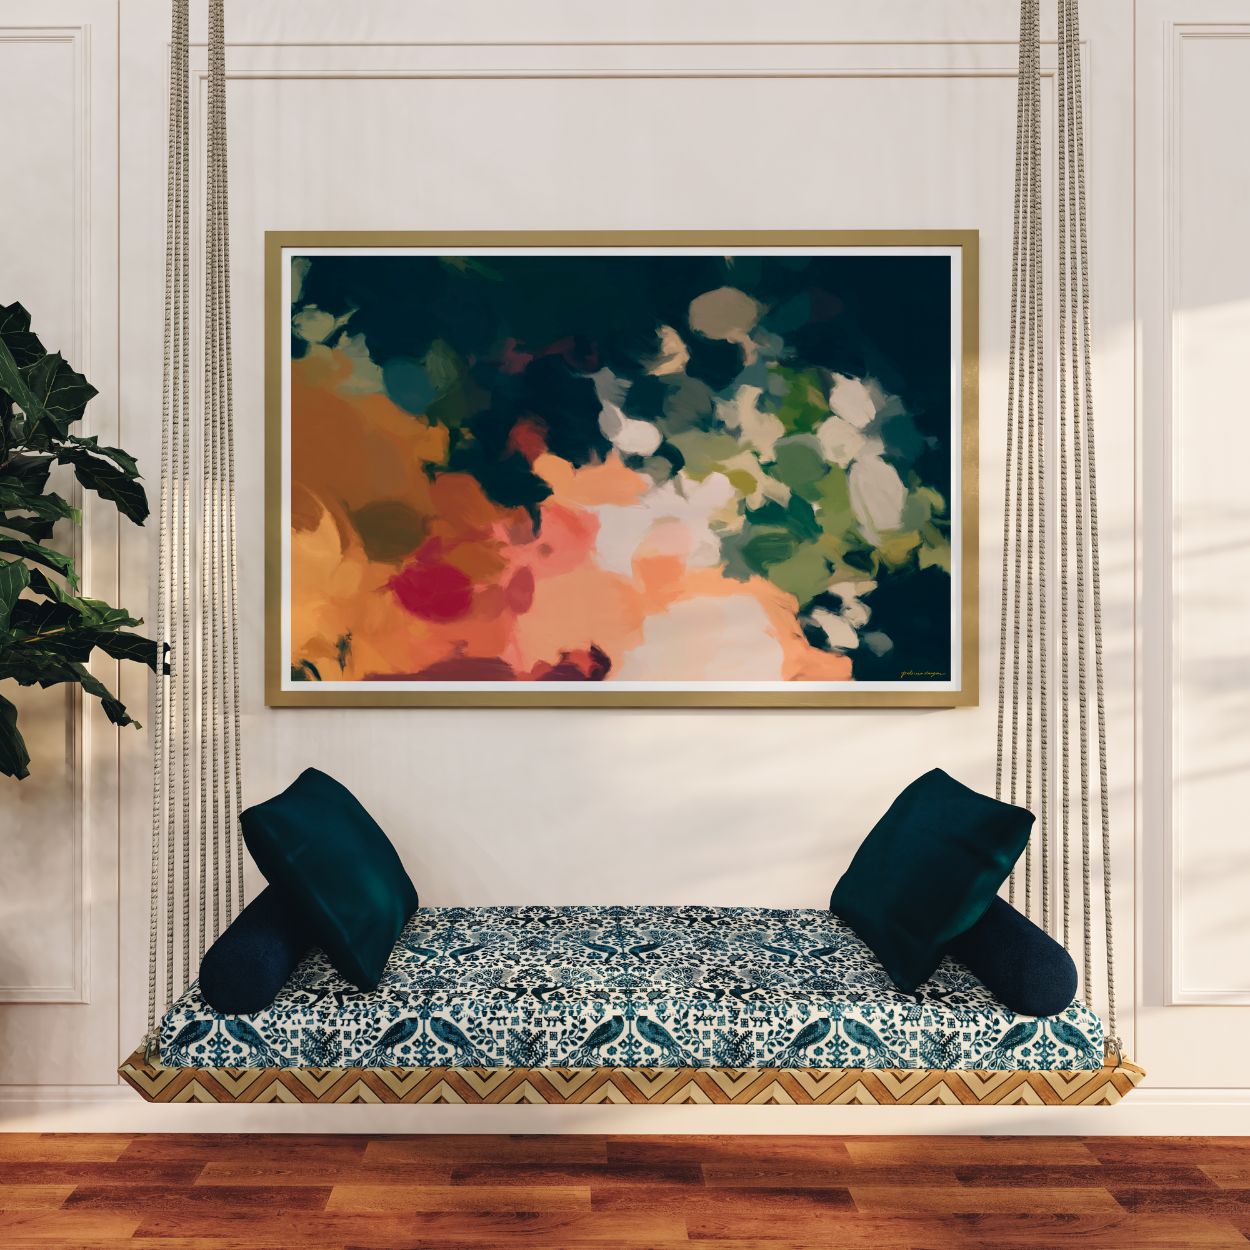 Ria, blue and orange colorful abstract wall art print by Parima Studio. Horizontal art for over hanging sofa in living room